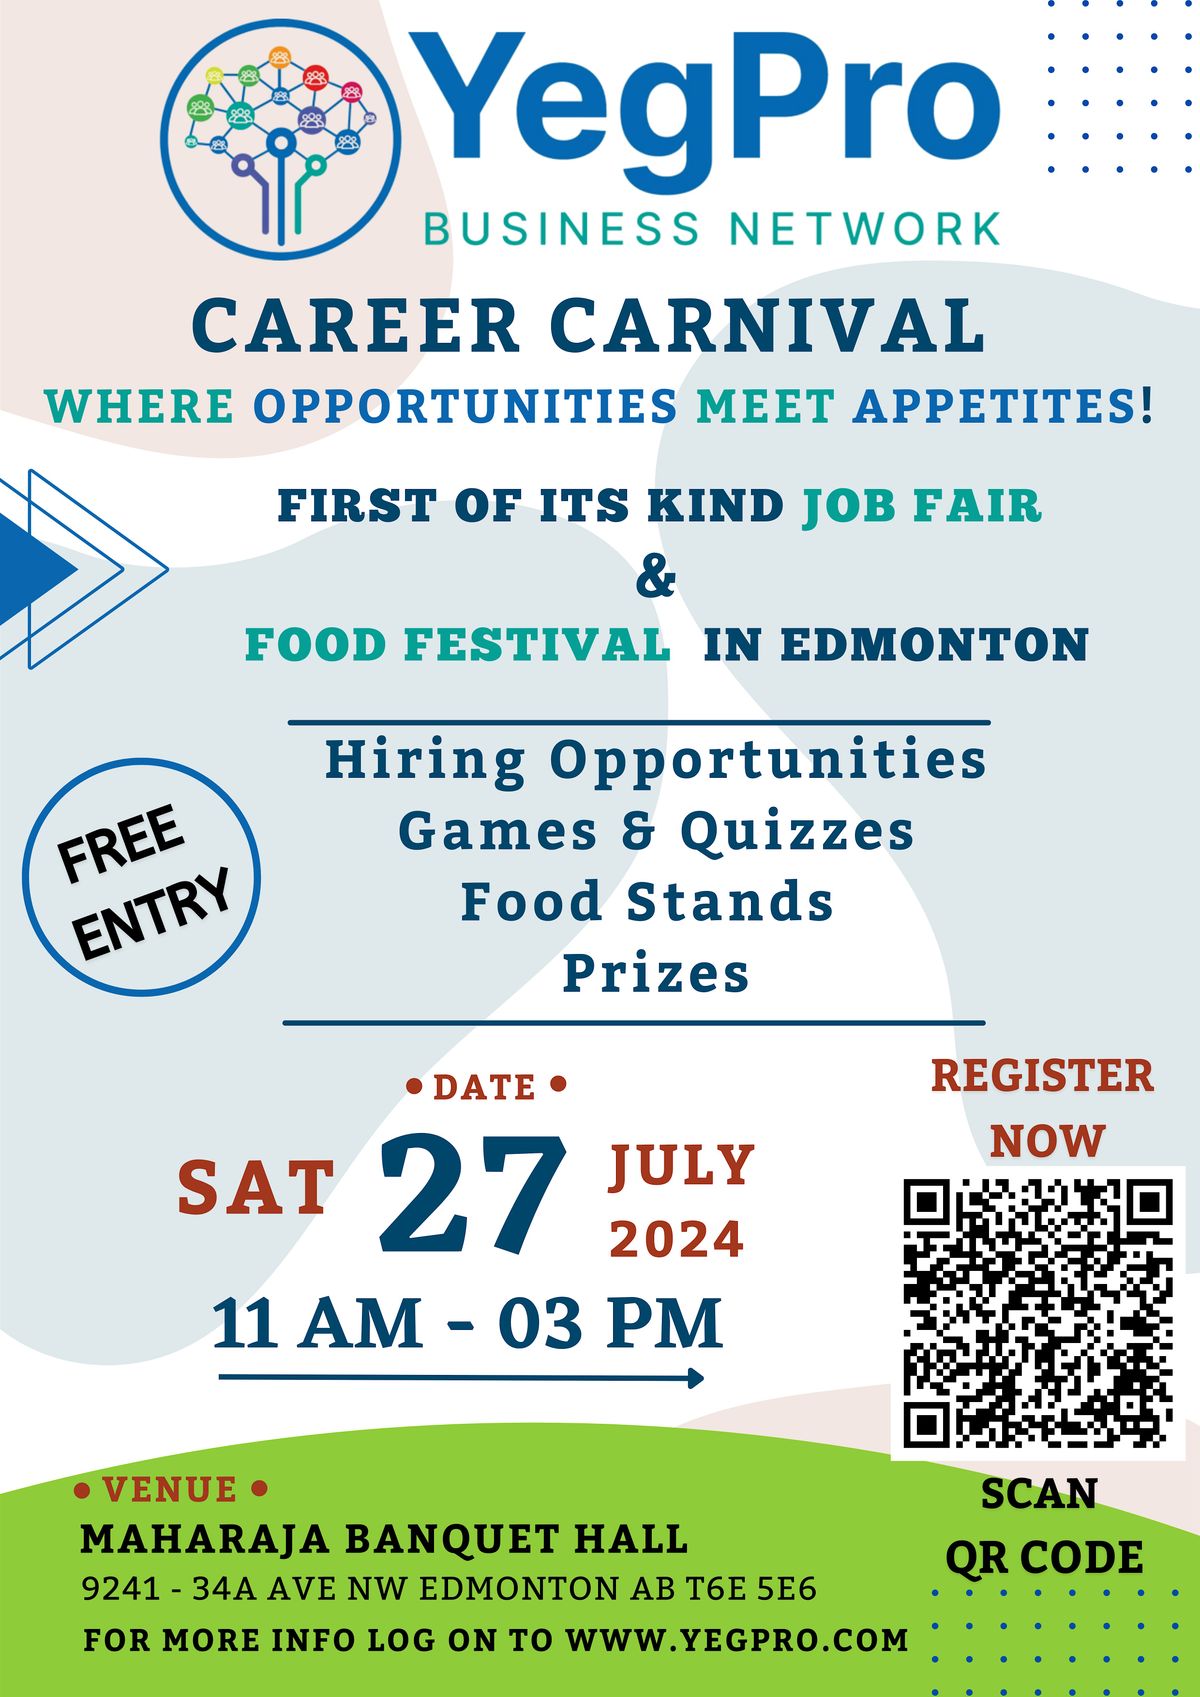 YEGPRO Career Carnival:  Where Opportunities Meet Appetites! July 27, 2024